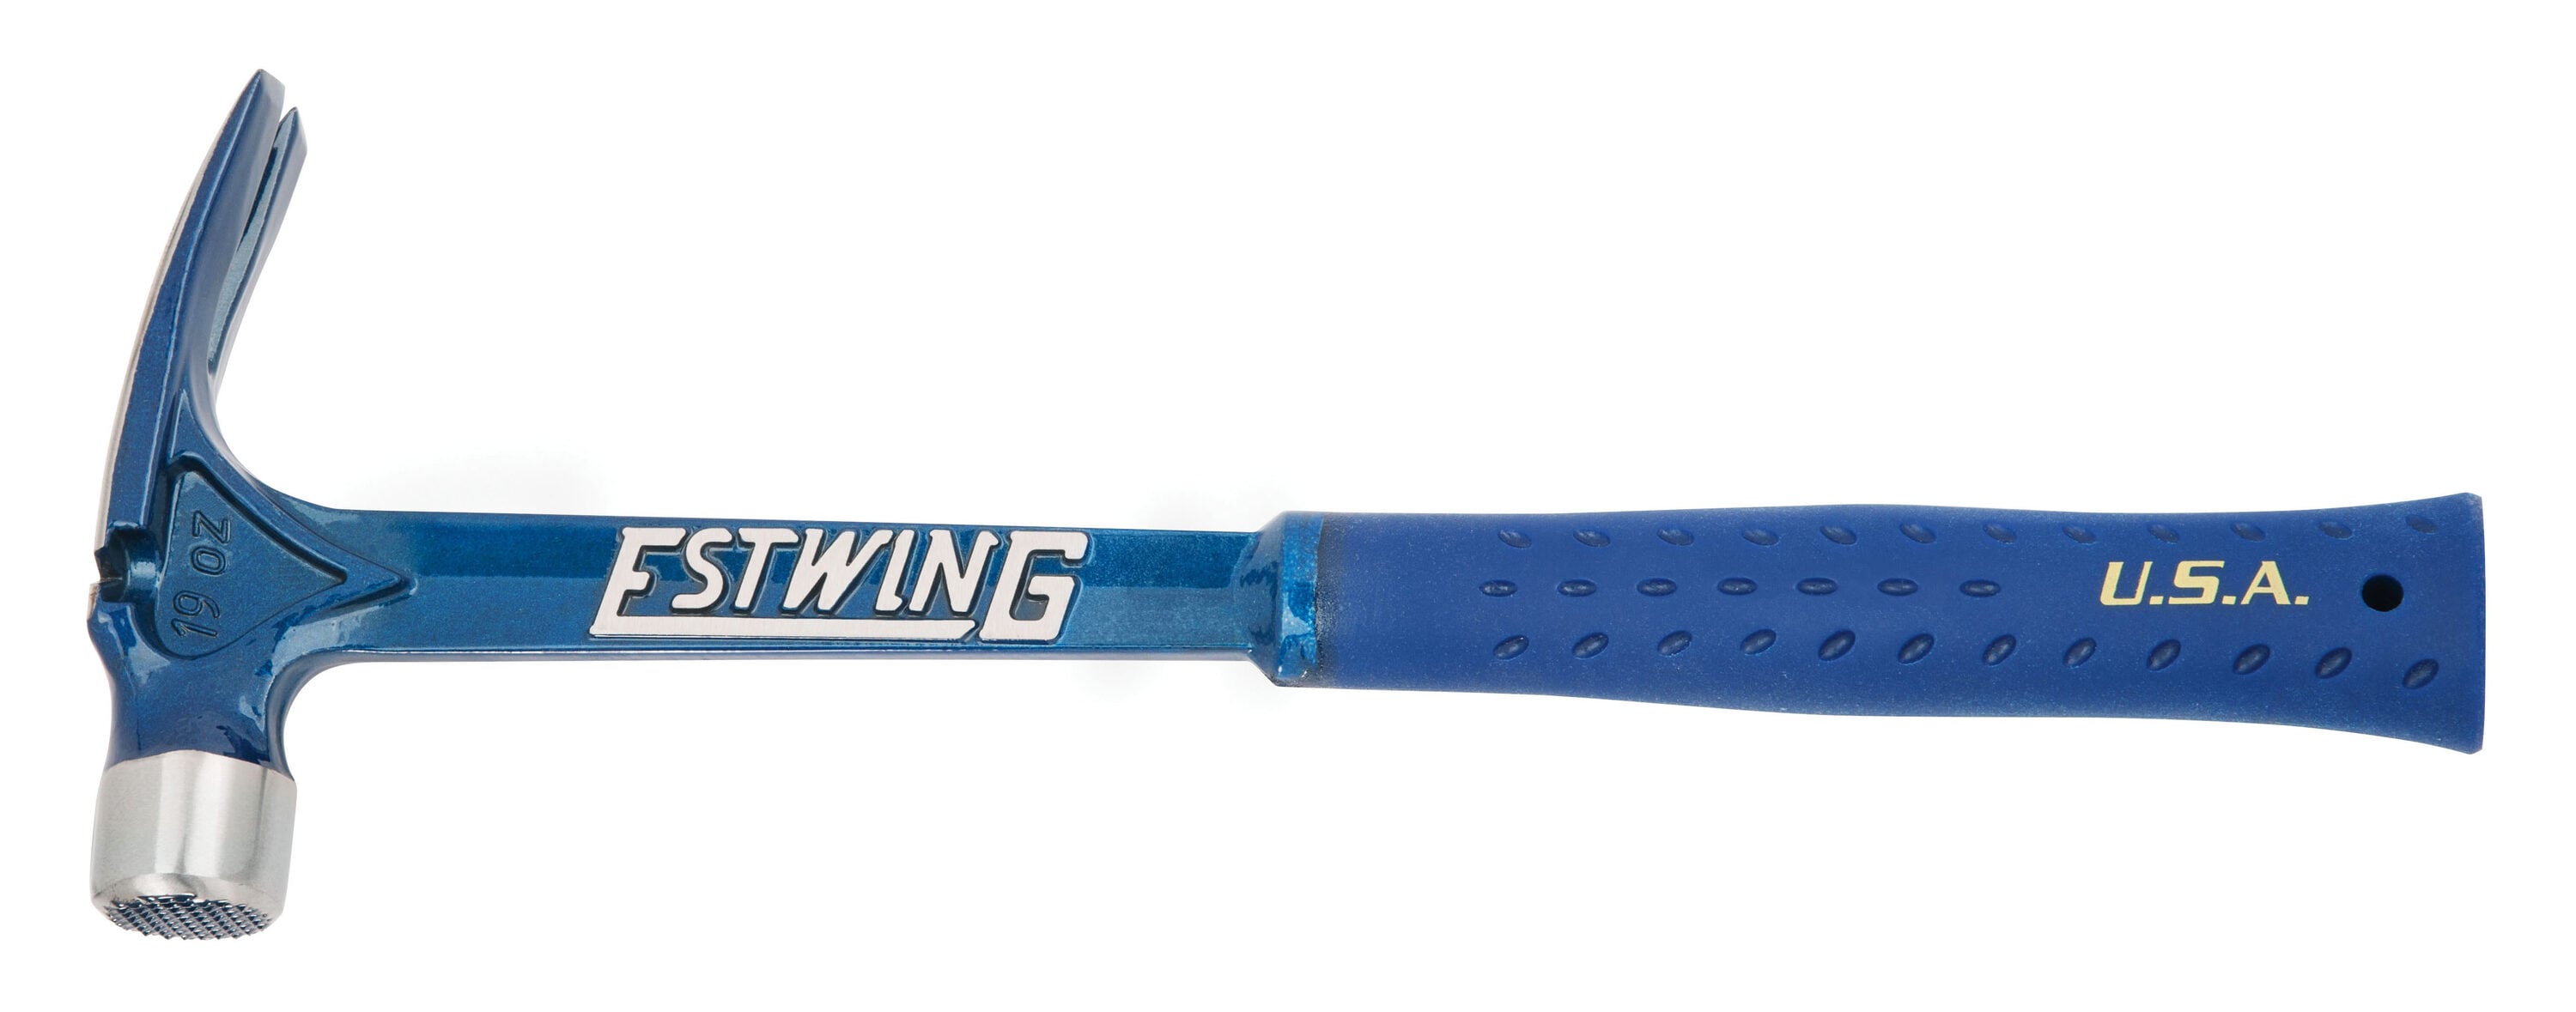 Estwing Milled Face Framing Hammer With Nail Starter (Fiberglass) - Estwing